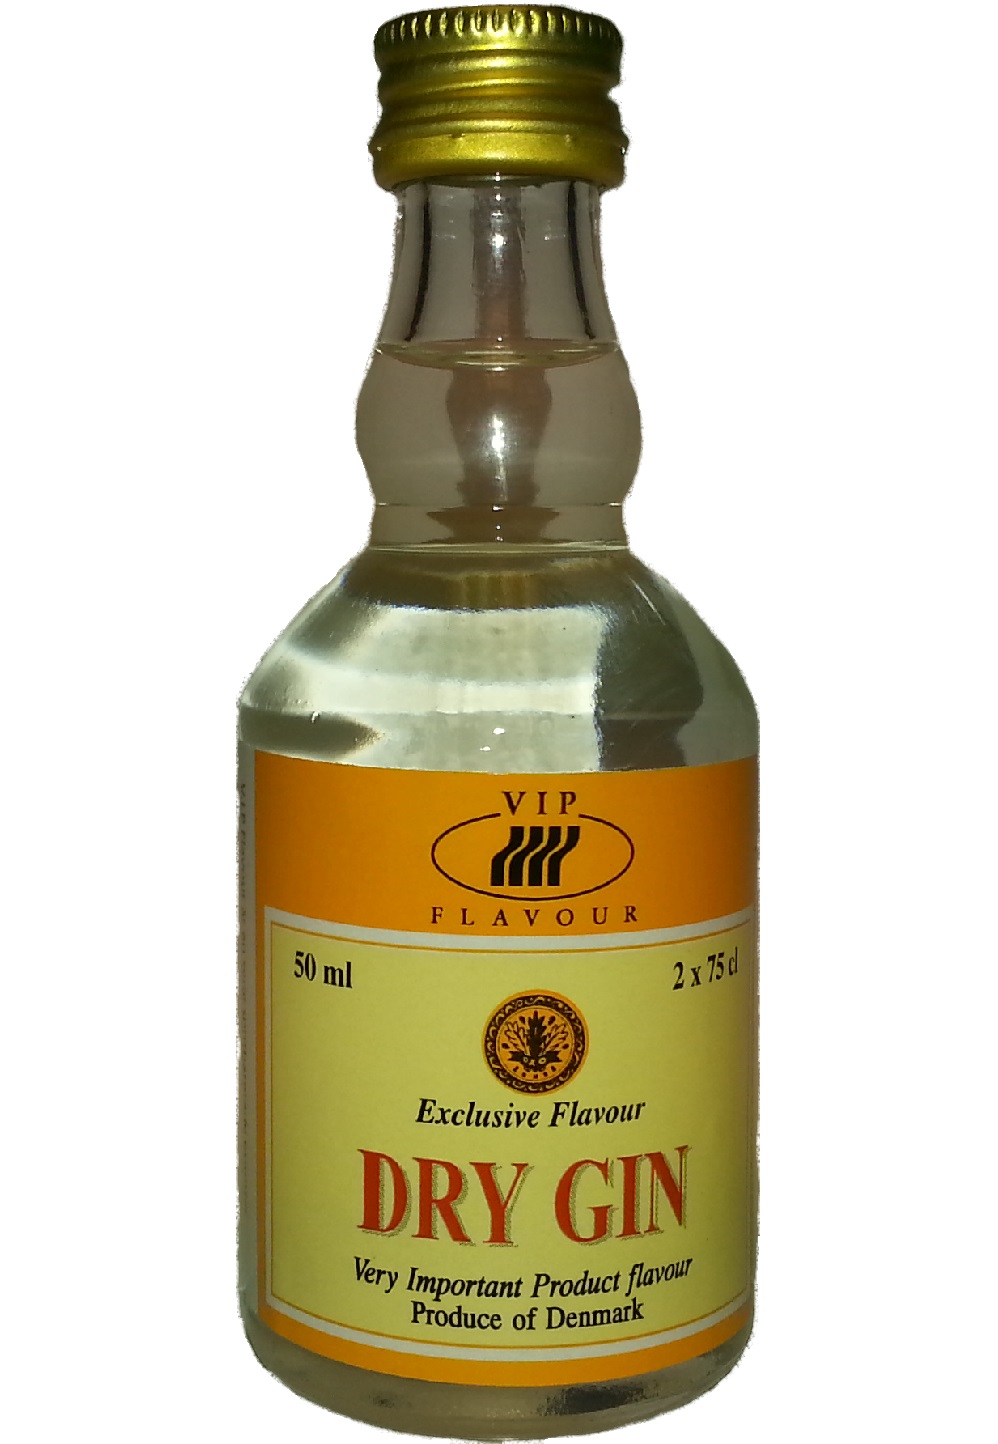 A-VIP DRY GIN FLAVOUR